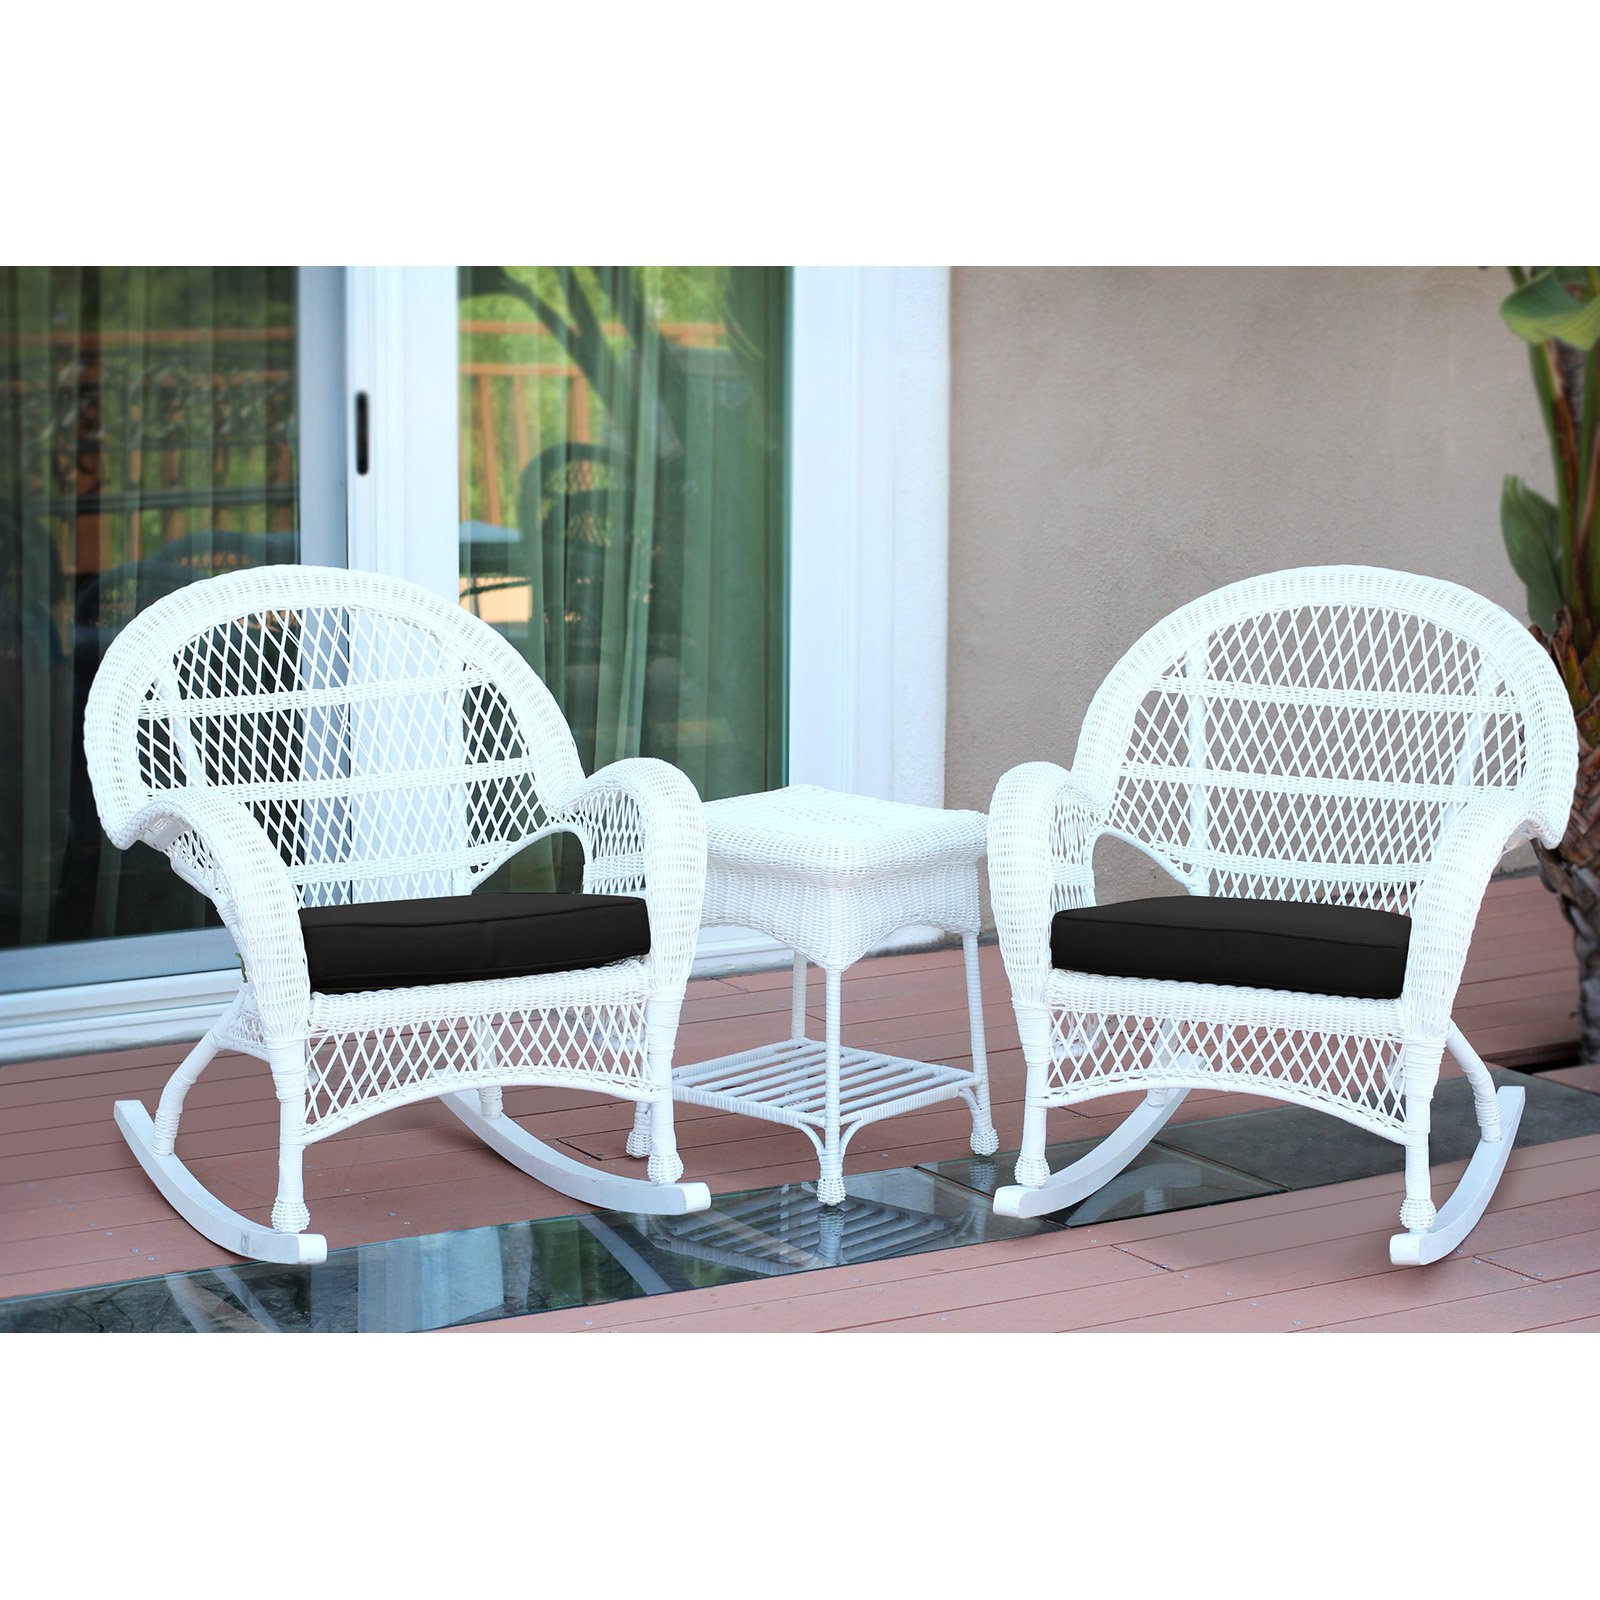 Jeco Santa Maria 3 Piece Wicker Rocker Chat Set with Optional Cushion - image 3 of 11